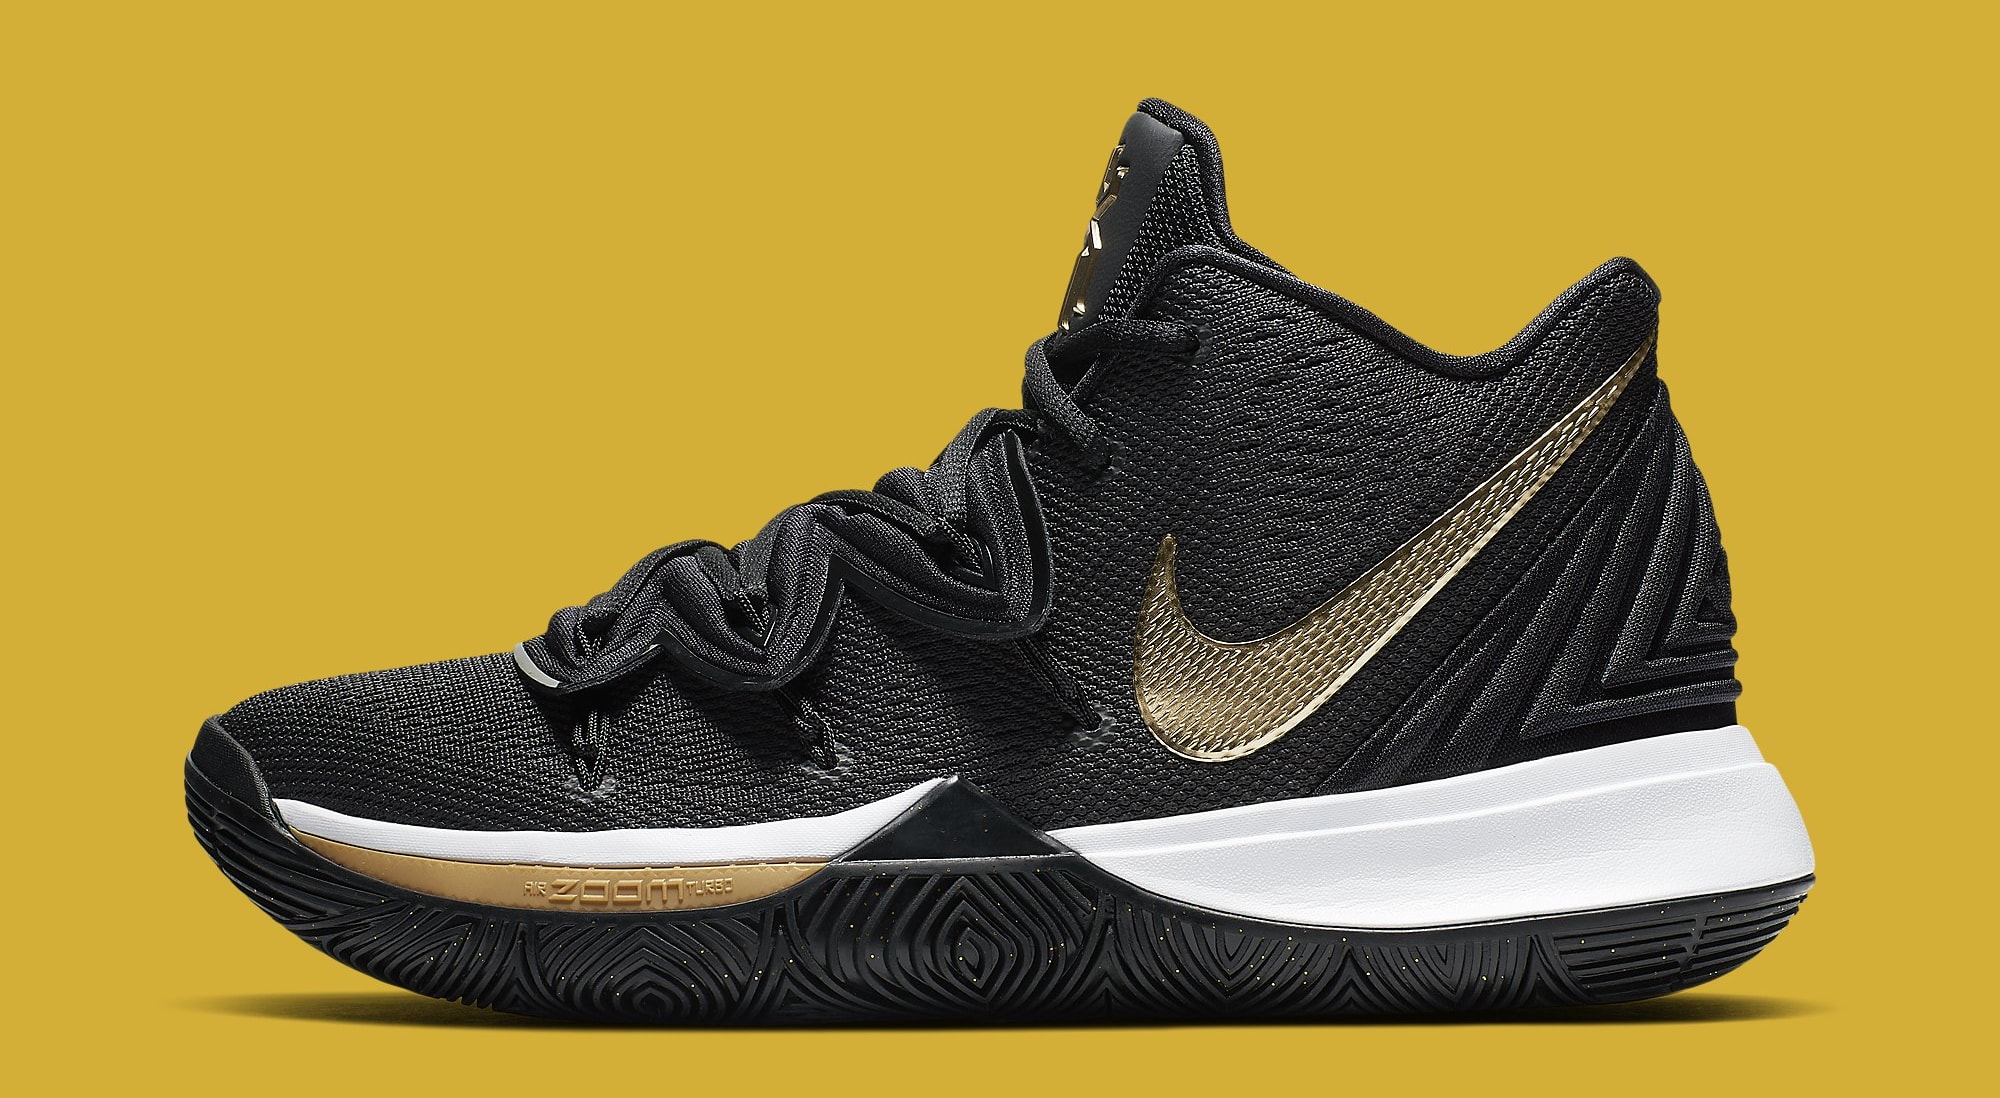 Nike Kyrie 5 &quot;Black & Gold&quot; Inspired By 2016 NBA Finals: Official Photos